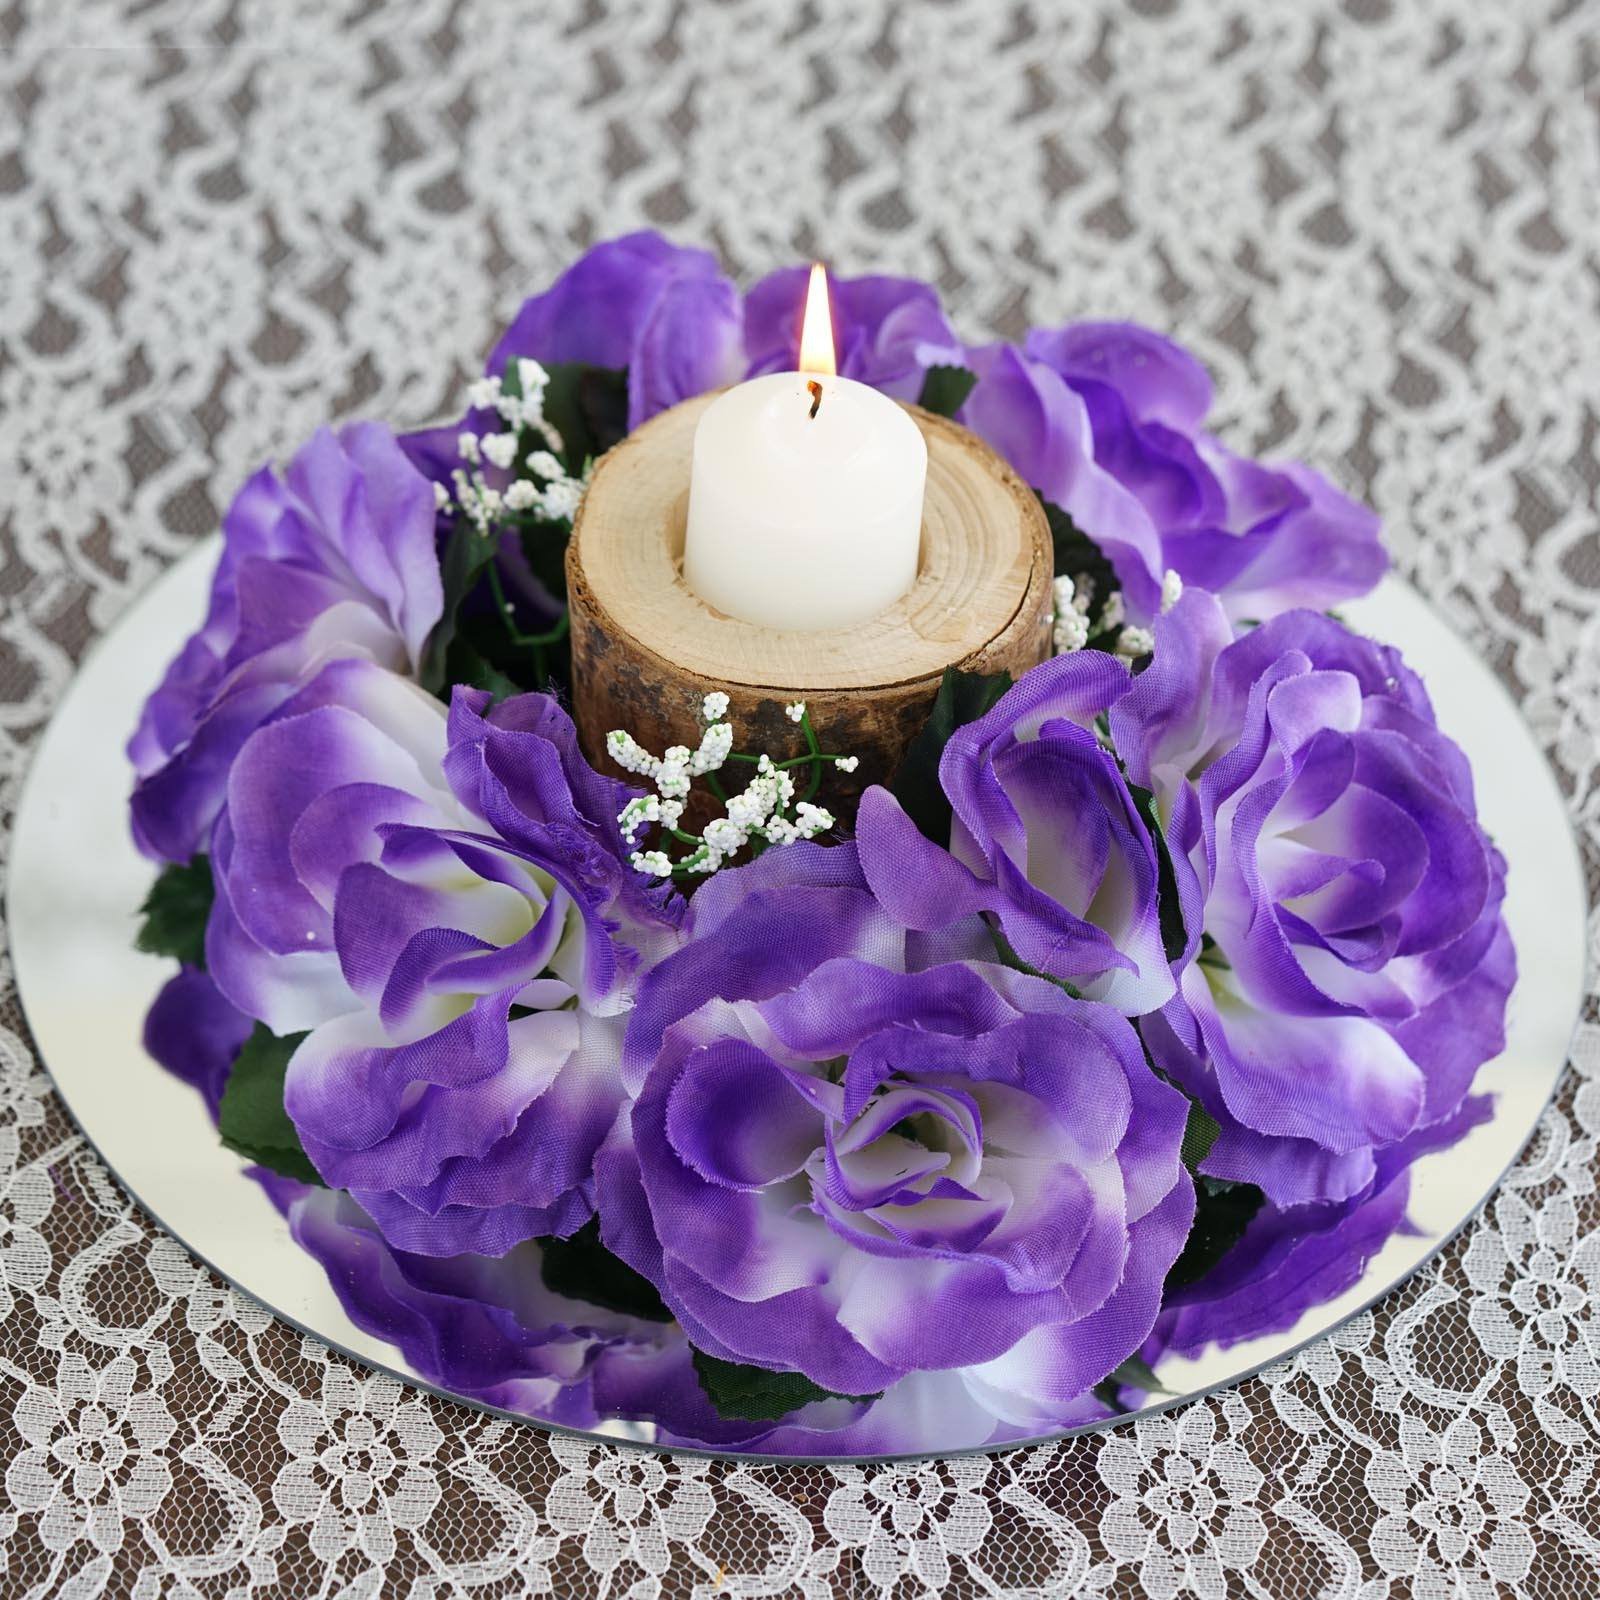 8 Pack of Artificial Purple Rose Candle Rings Wedding Centerpiece ...